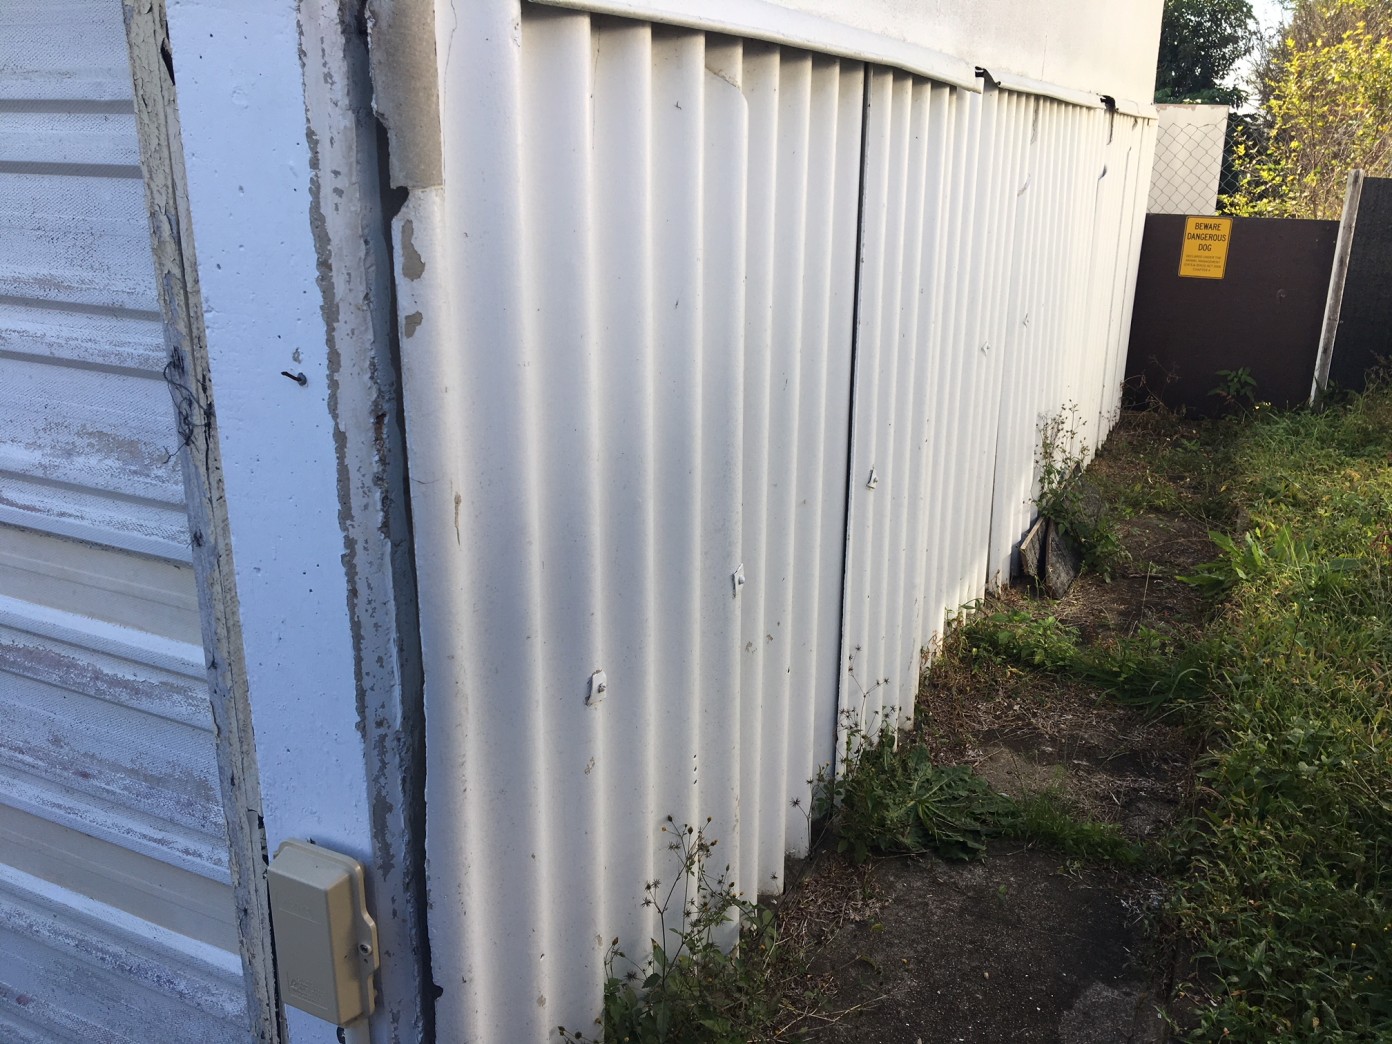 Asbestos Removal Services Brisbane White corrugated iron wall on the side of a house